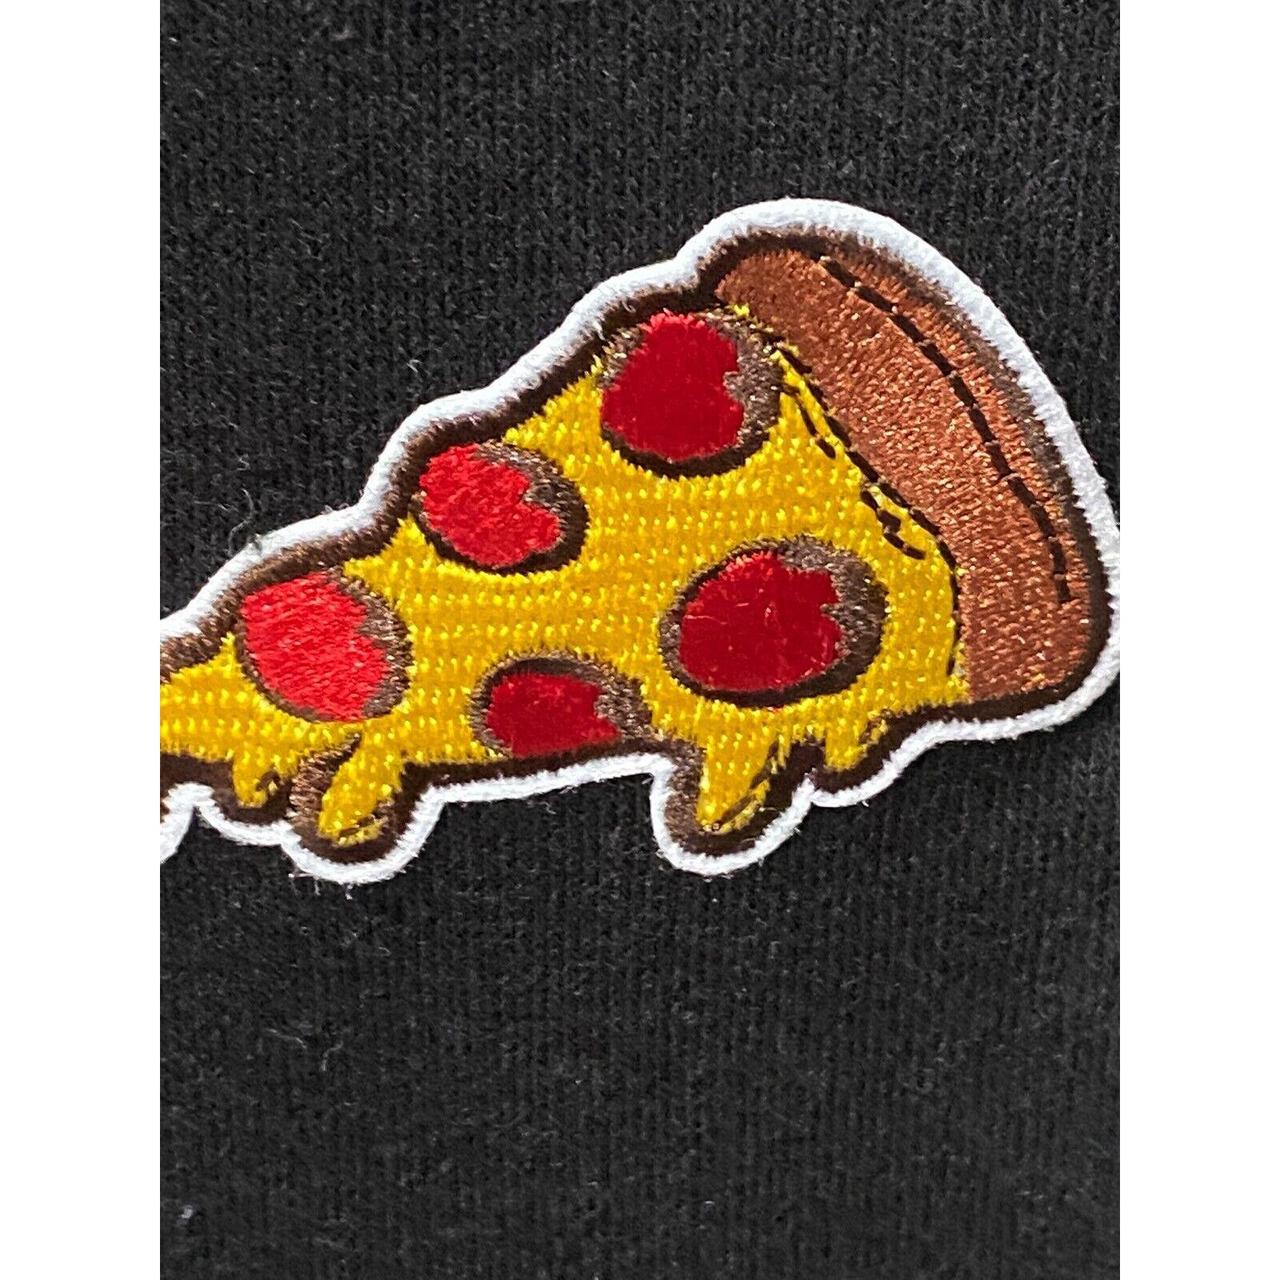 Product Image 1 - And Now This Embroidered Pizza